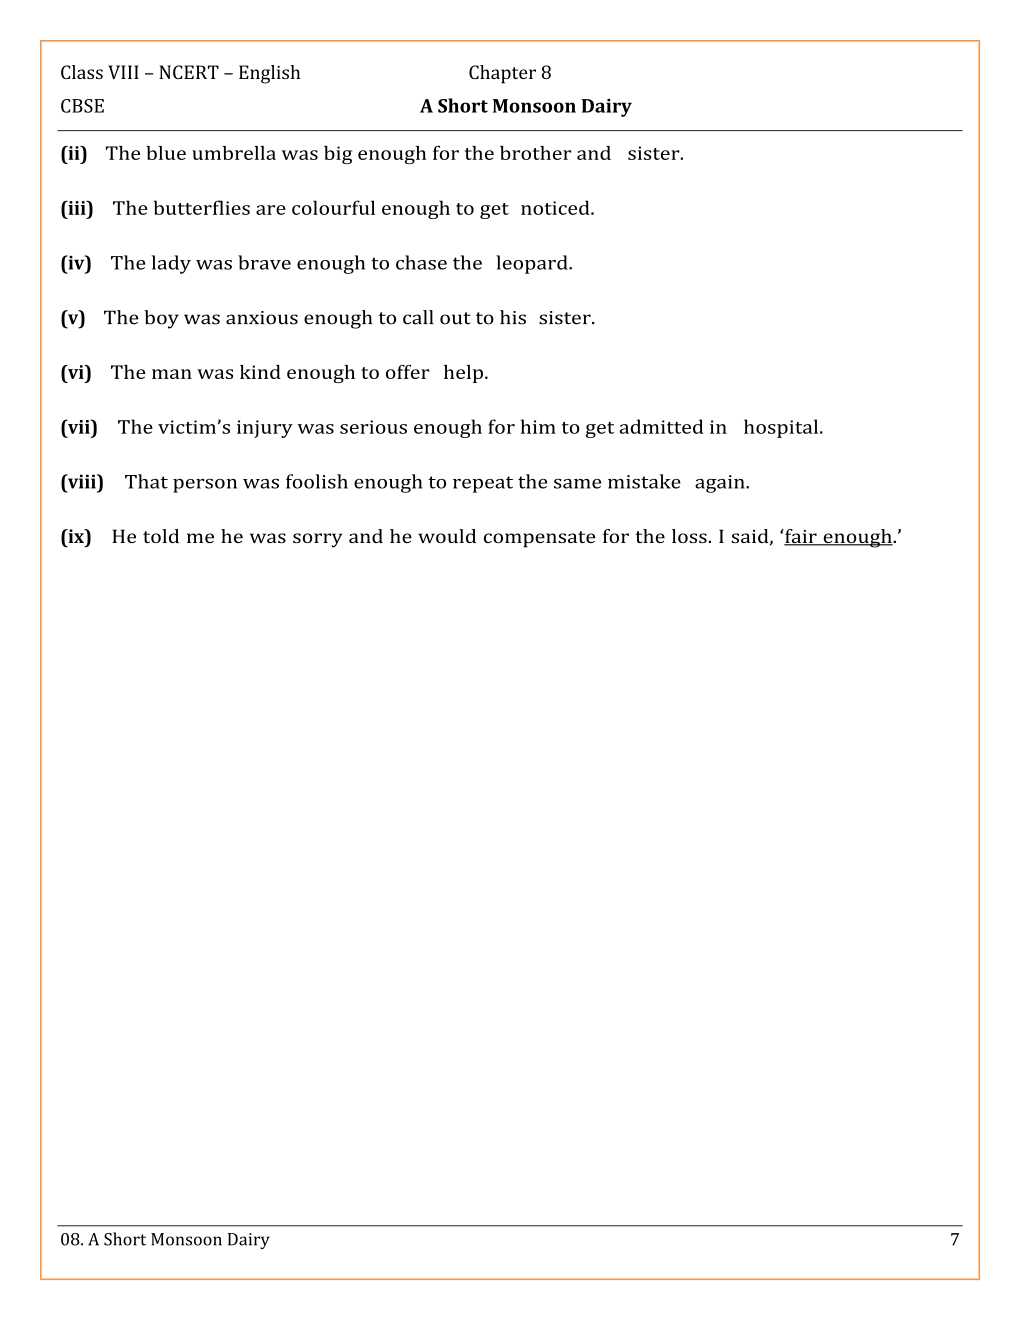 NCERT Solutions For Class 8 English Honey Dew Chapter 8 